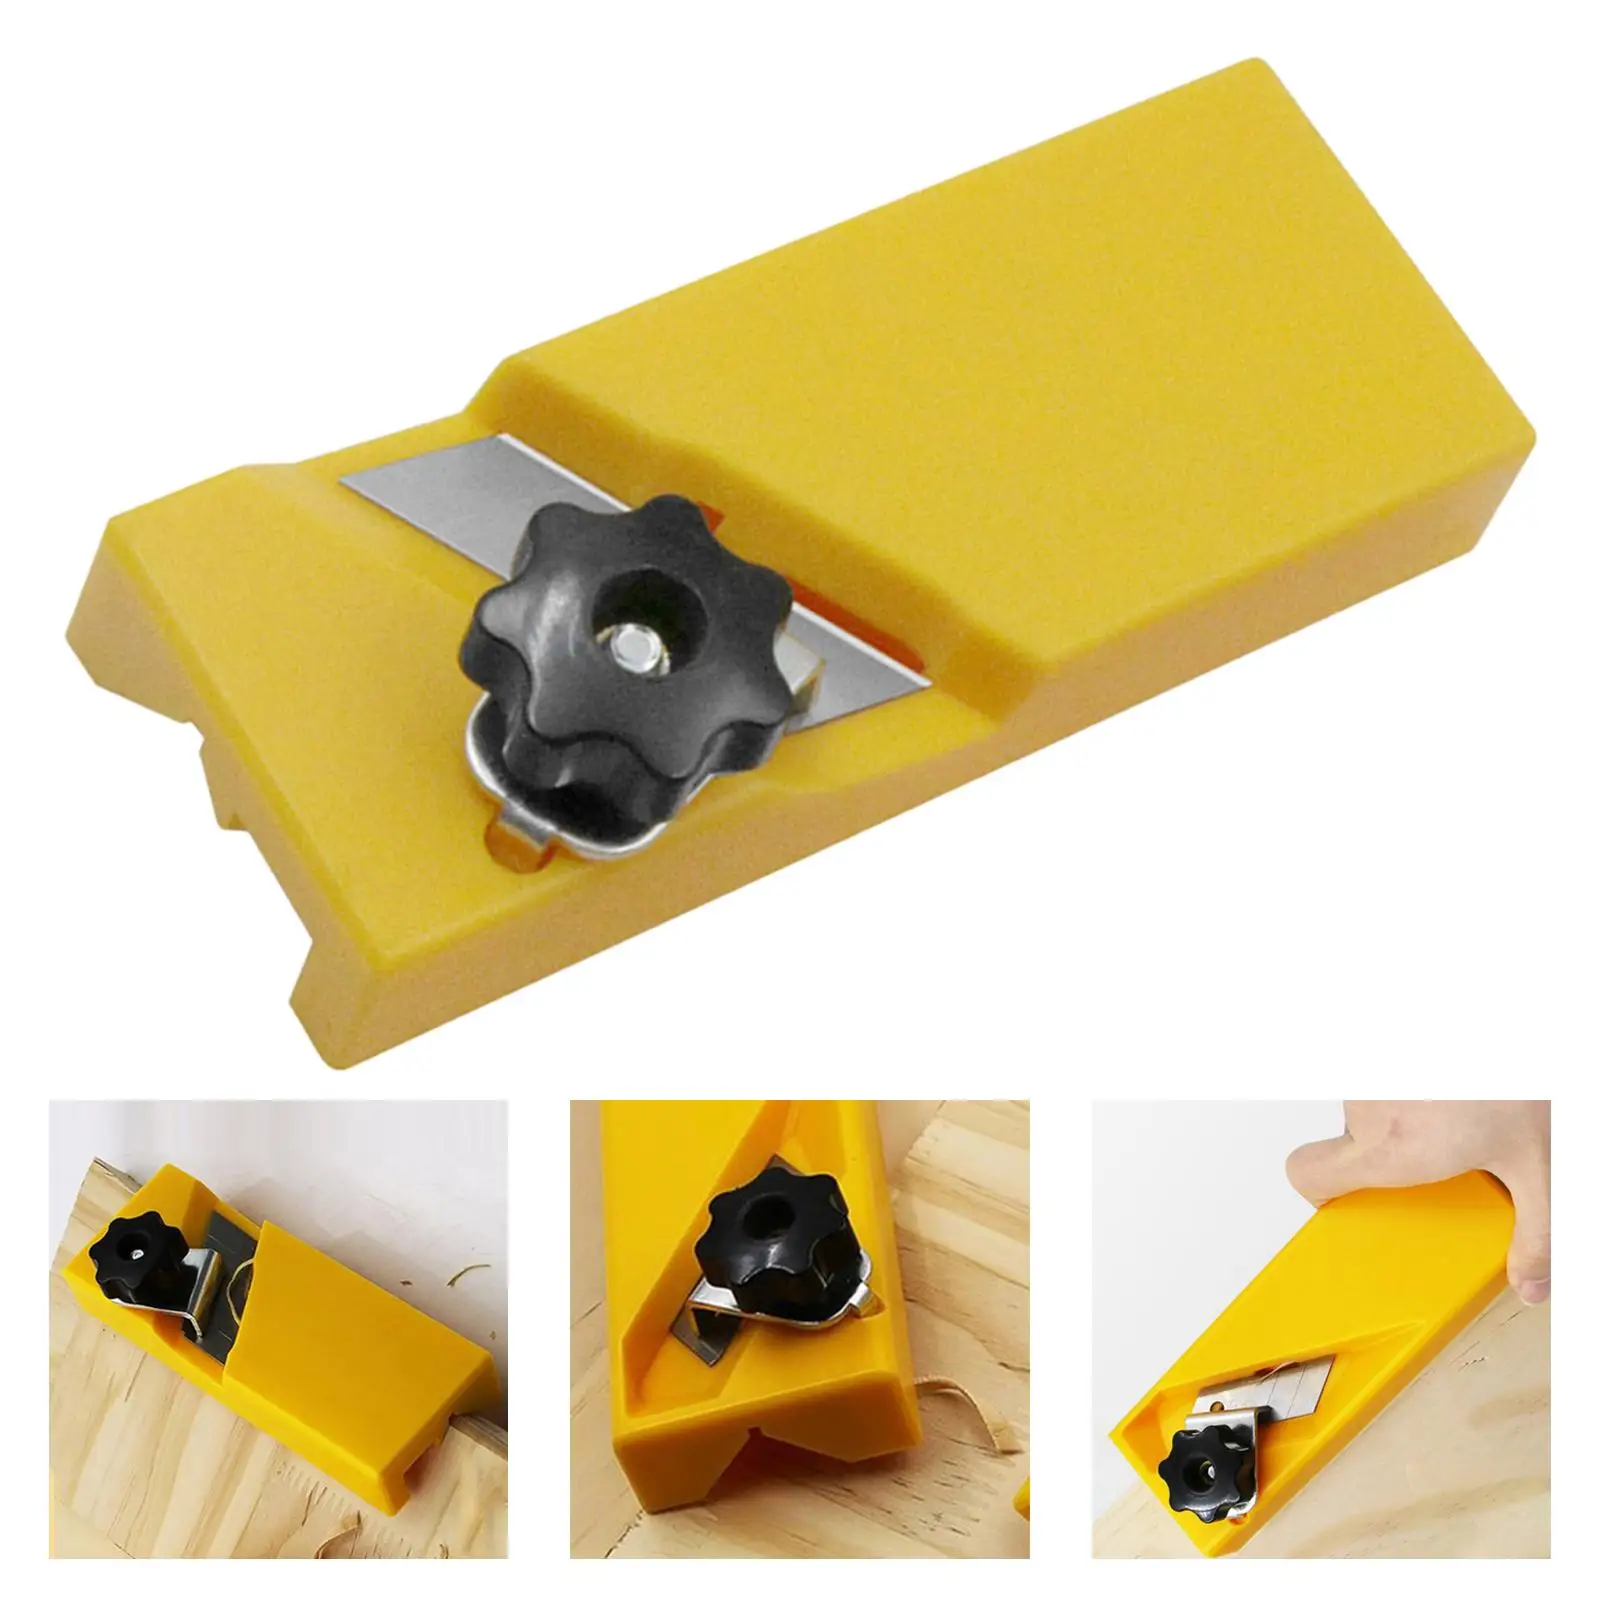 Woodworking Gypsum Board Planer Tool Flat Square Plane Drywall Edge Chamfer Hand Saw Box Hand Plasterboard Cutter